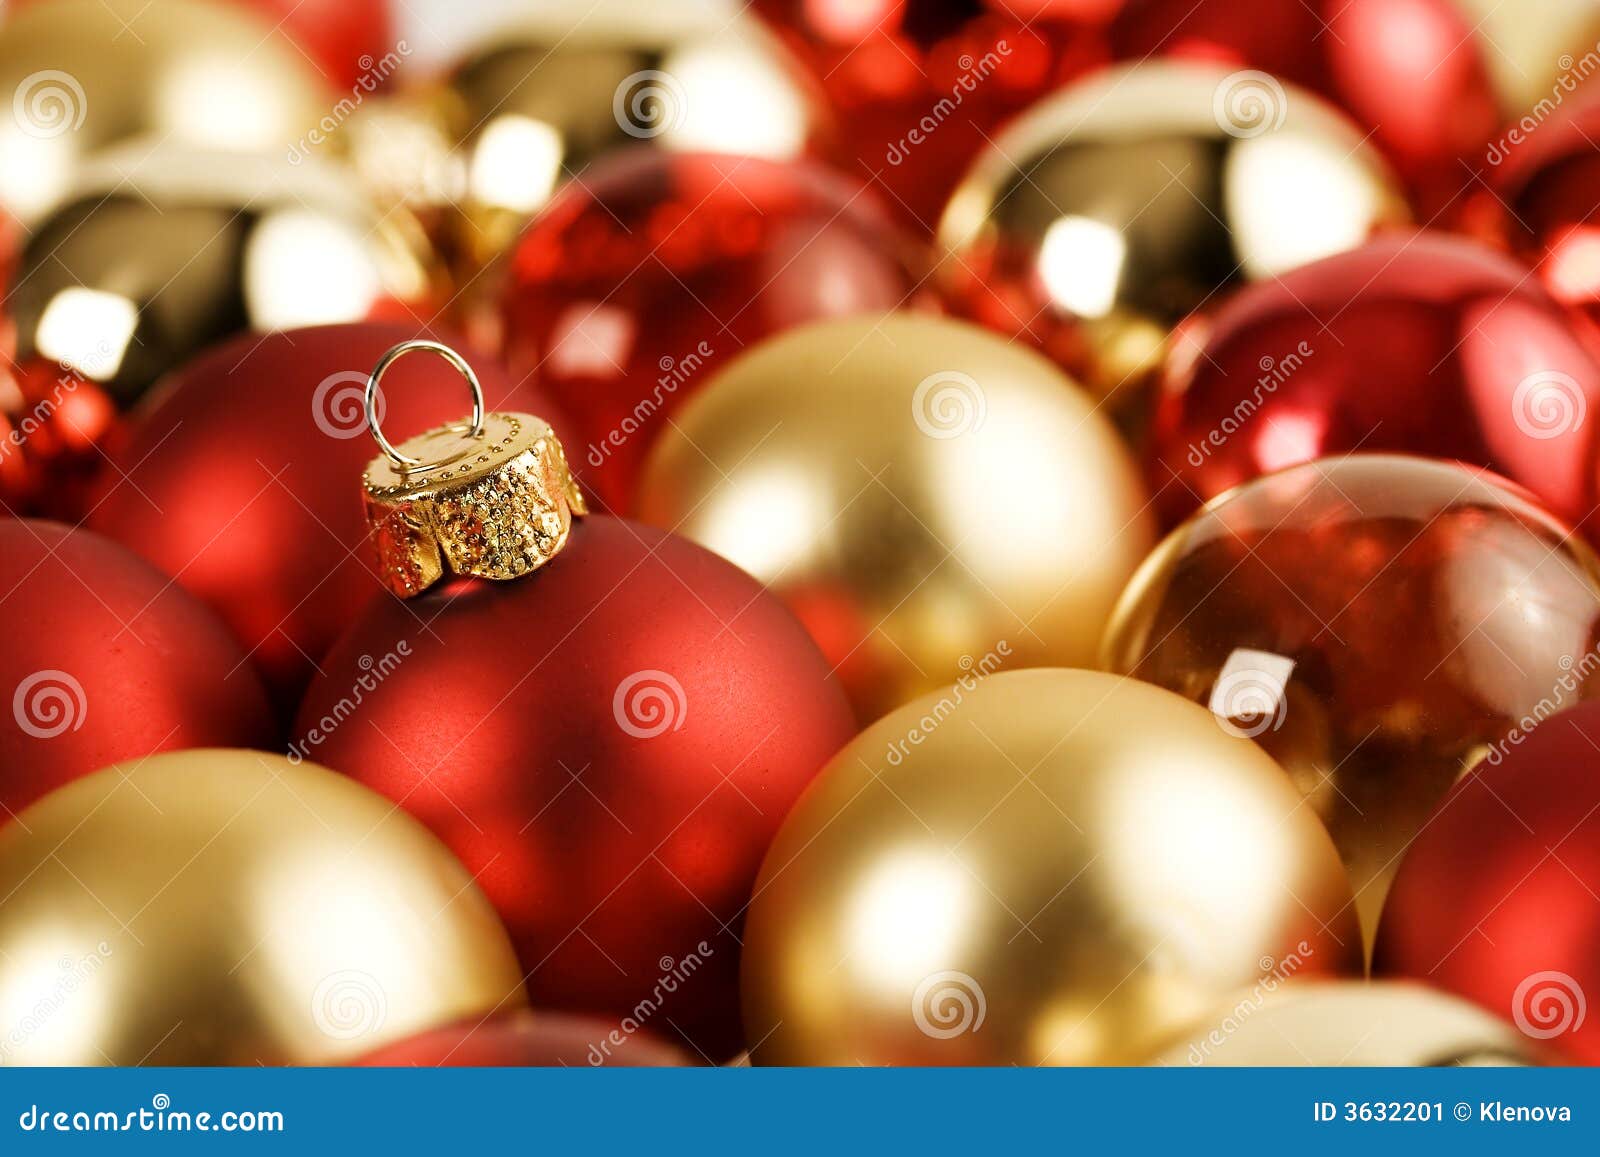 Gold an Red Christmas Balls Stock Image - Image of celebrate, christmas ...